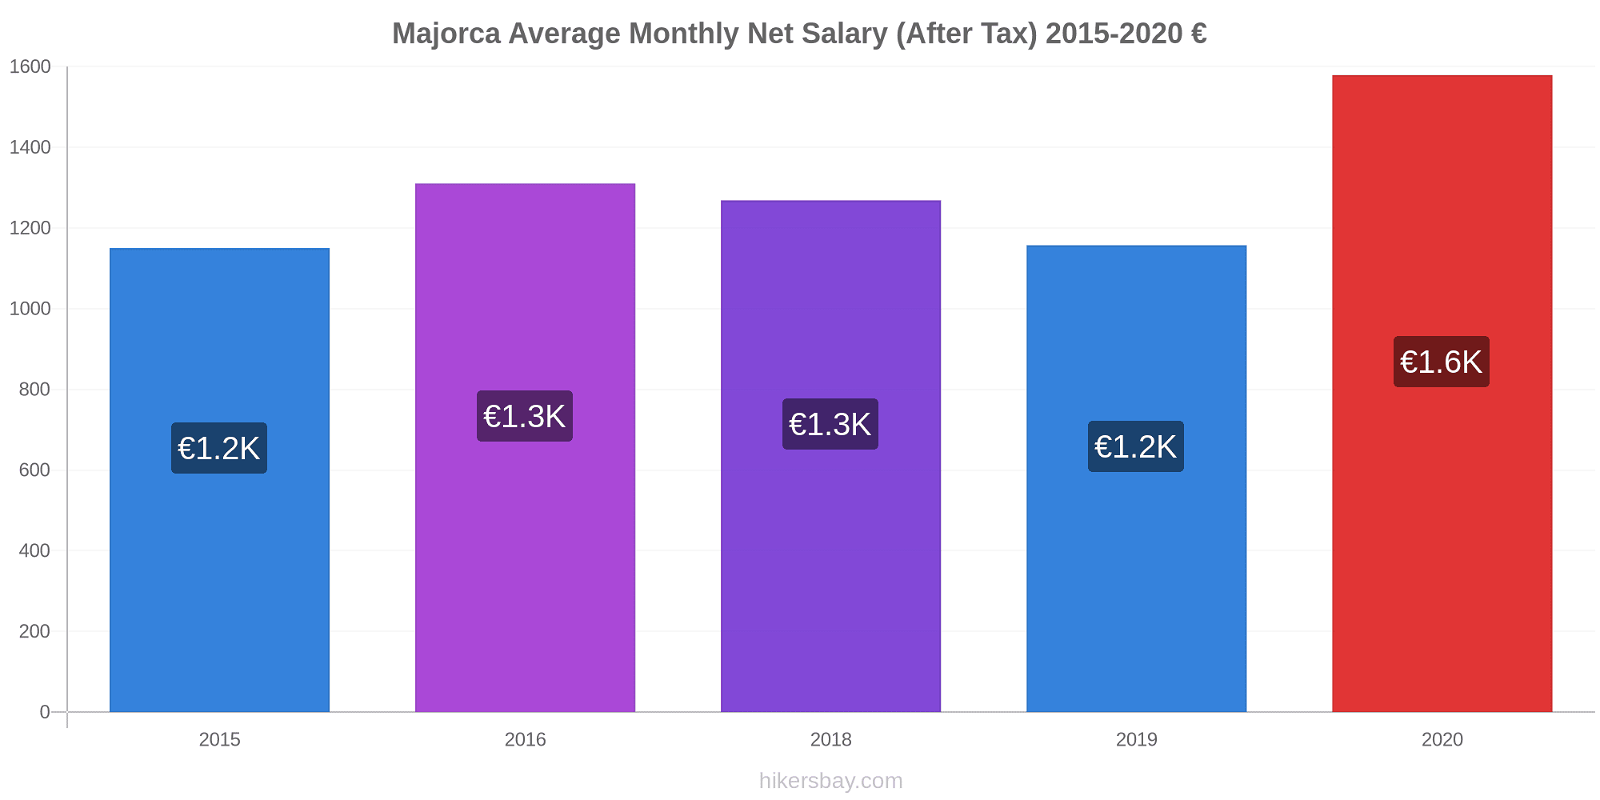 Majorca price changes Average Monthly Net Salary (After Tax) hikersbay.com